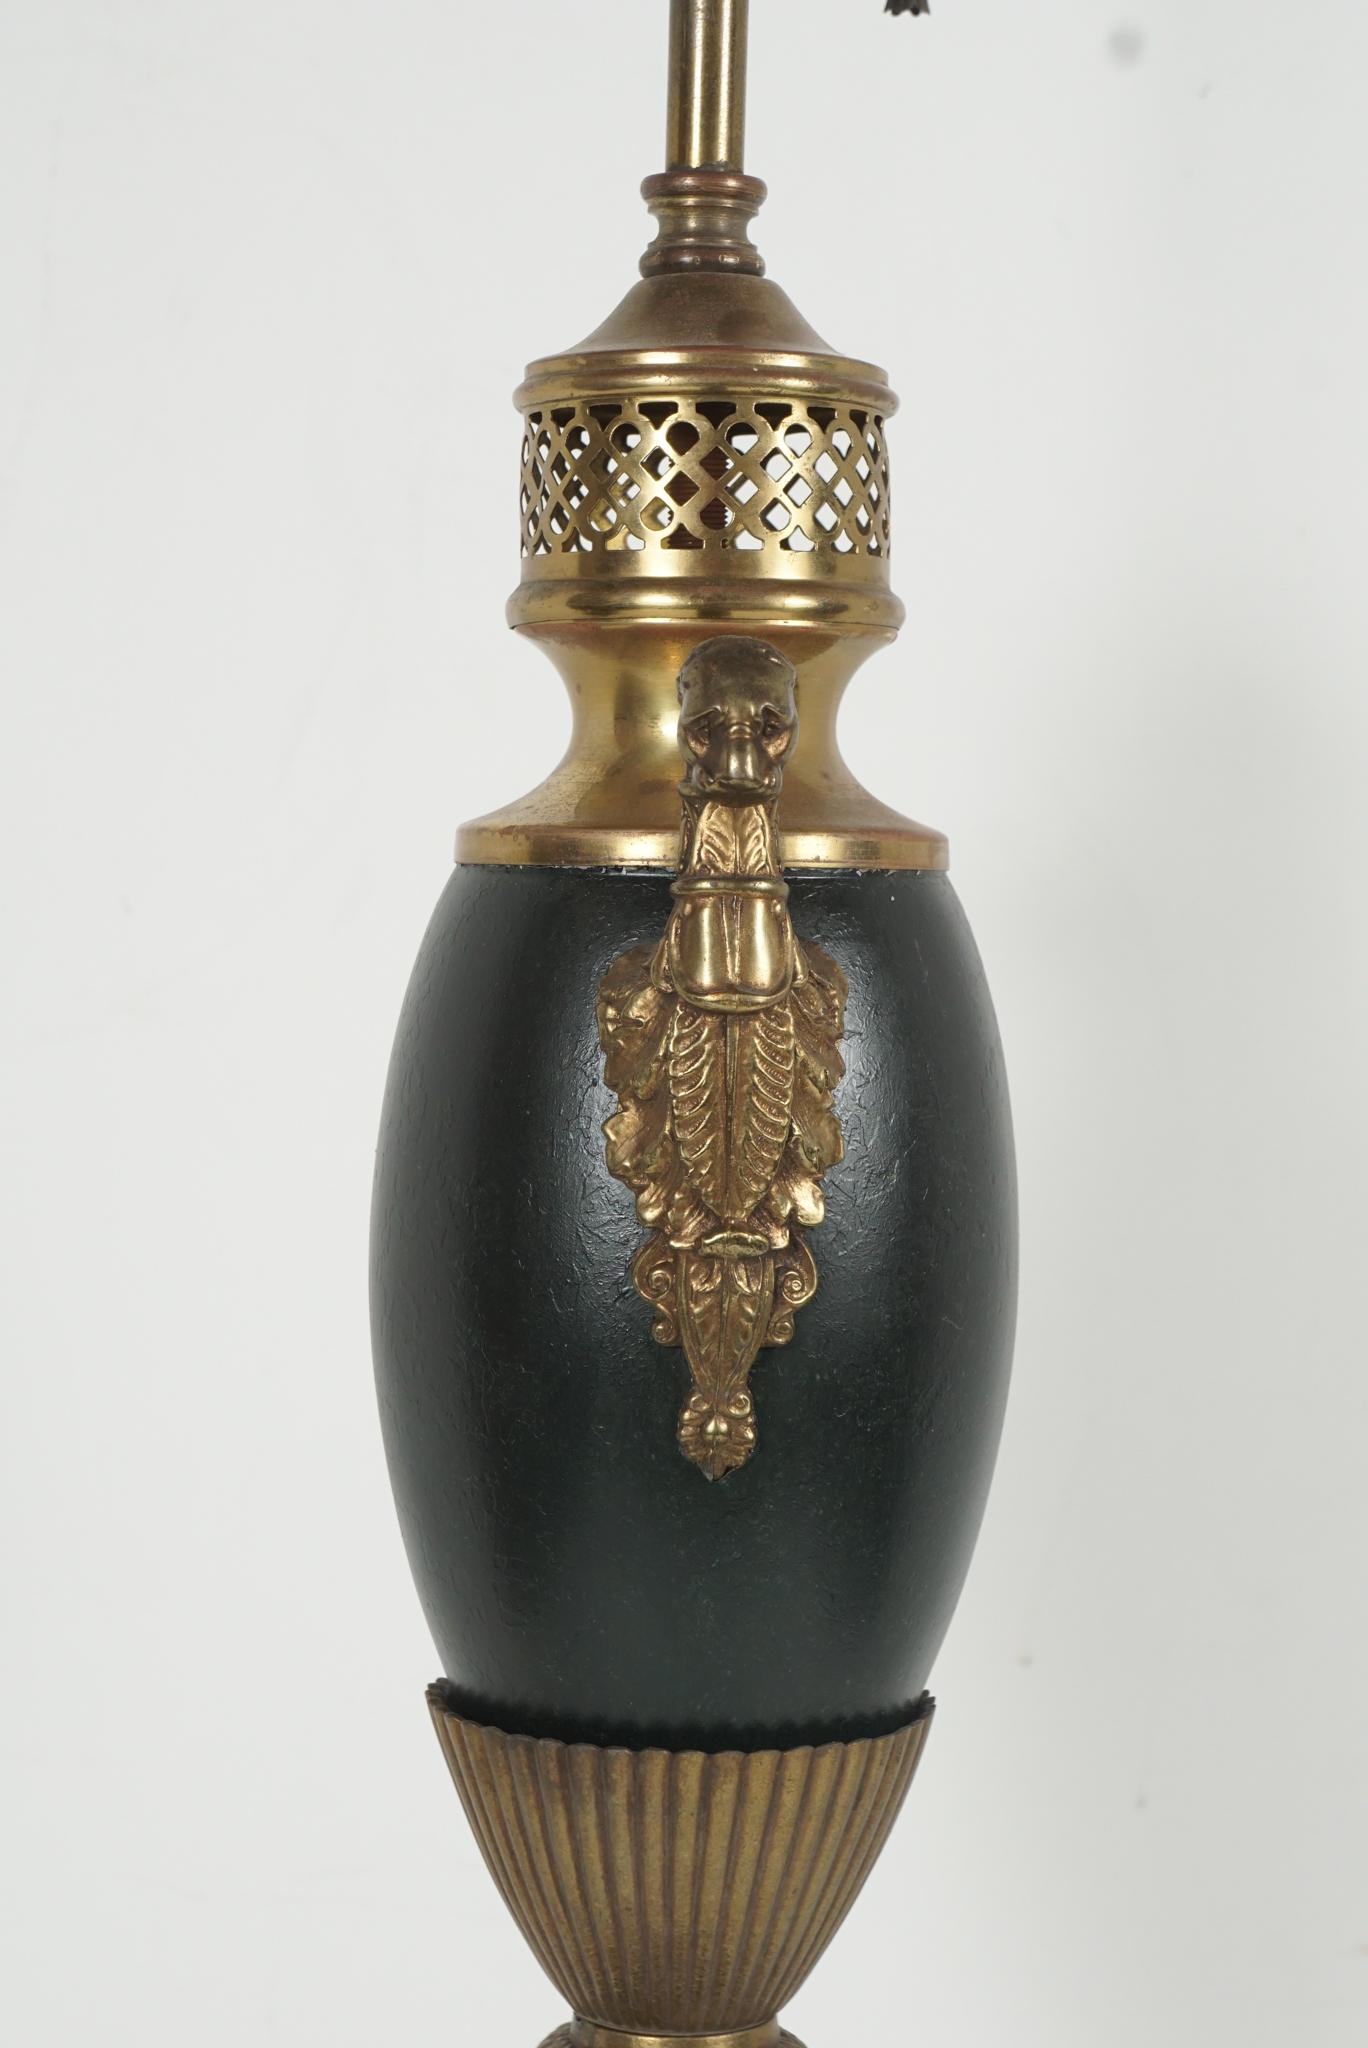 French Tole Late 19th to Early 20th Carcel Lamp from the Estate of Bunny Mellon For Sale 1